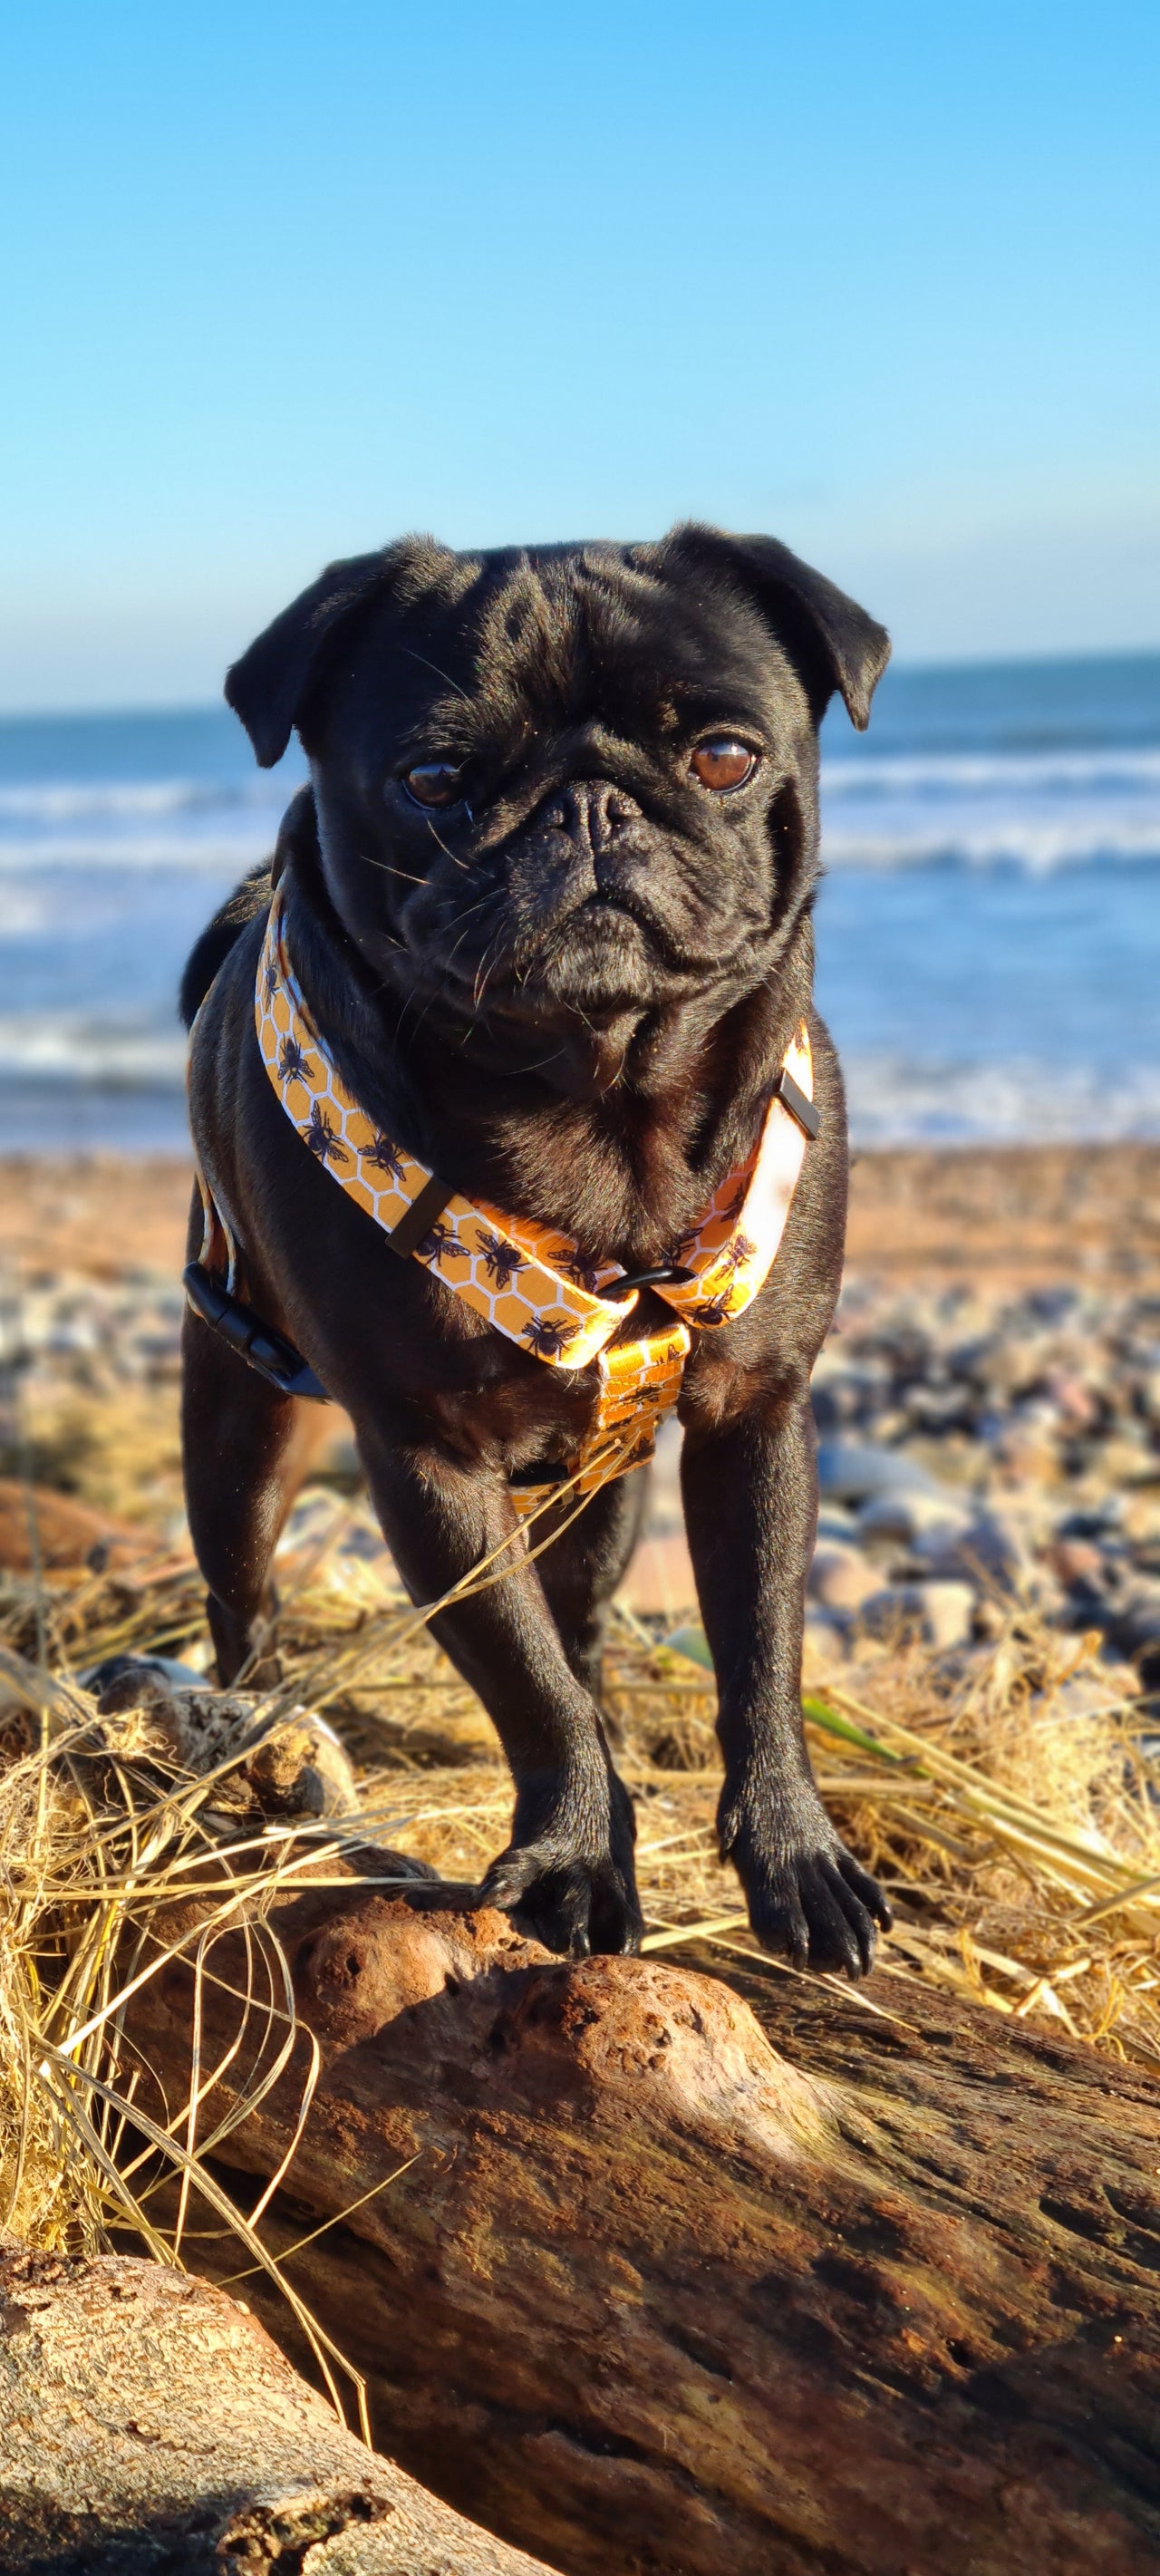 Black Pug wearing a TopDog Harnesses Bee Kind Strap dog harness standing on a piece of driftwood at the beach